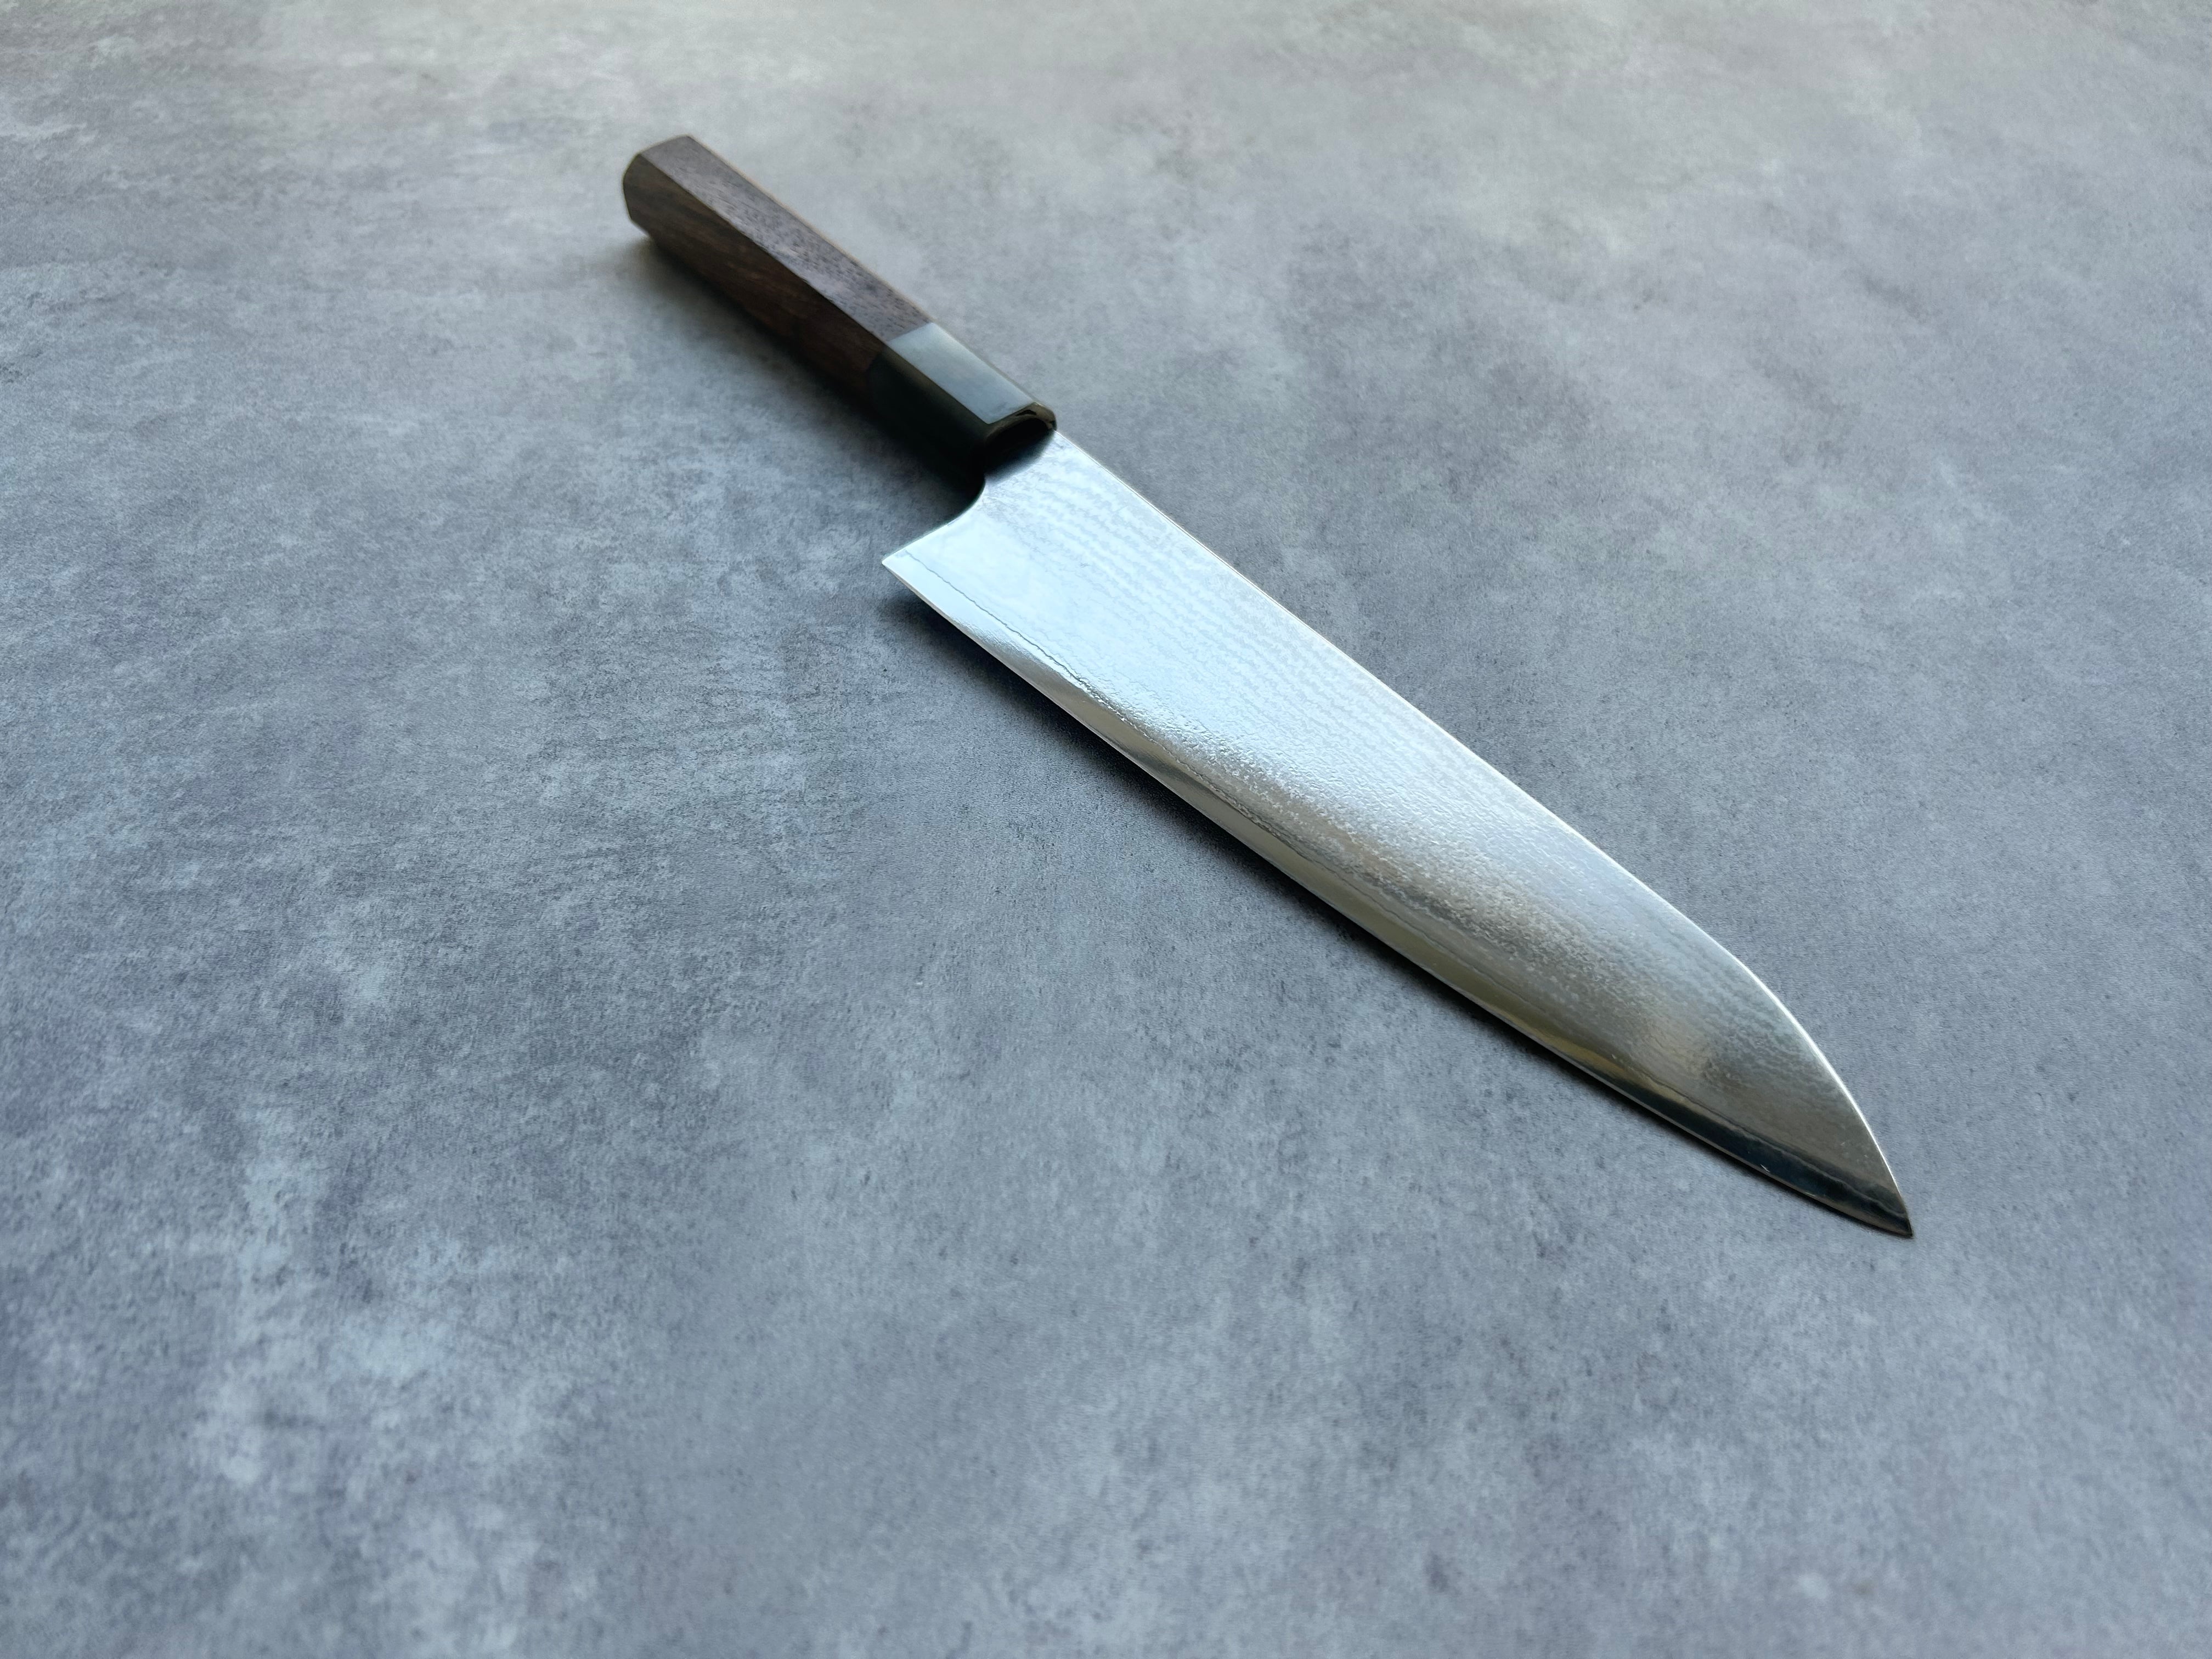 "ZEN" JAPANESE AUS-10 Damasucs 8inch Santoku- Best home-use high end RUI knife currently FREE SHIPPING